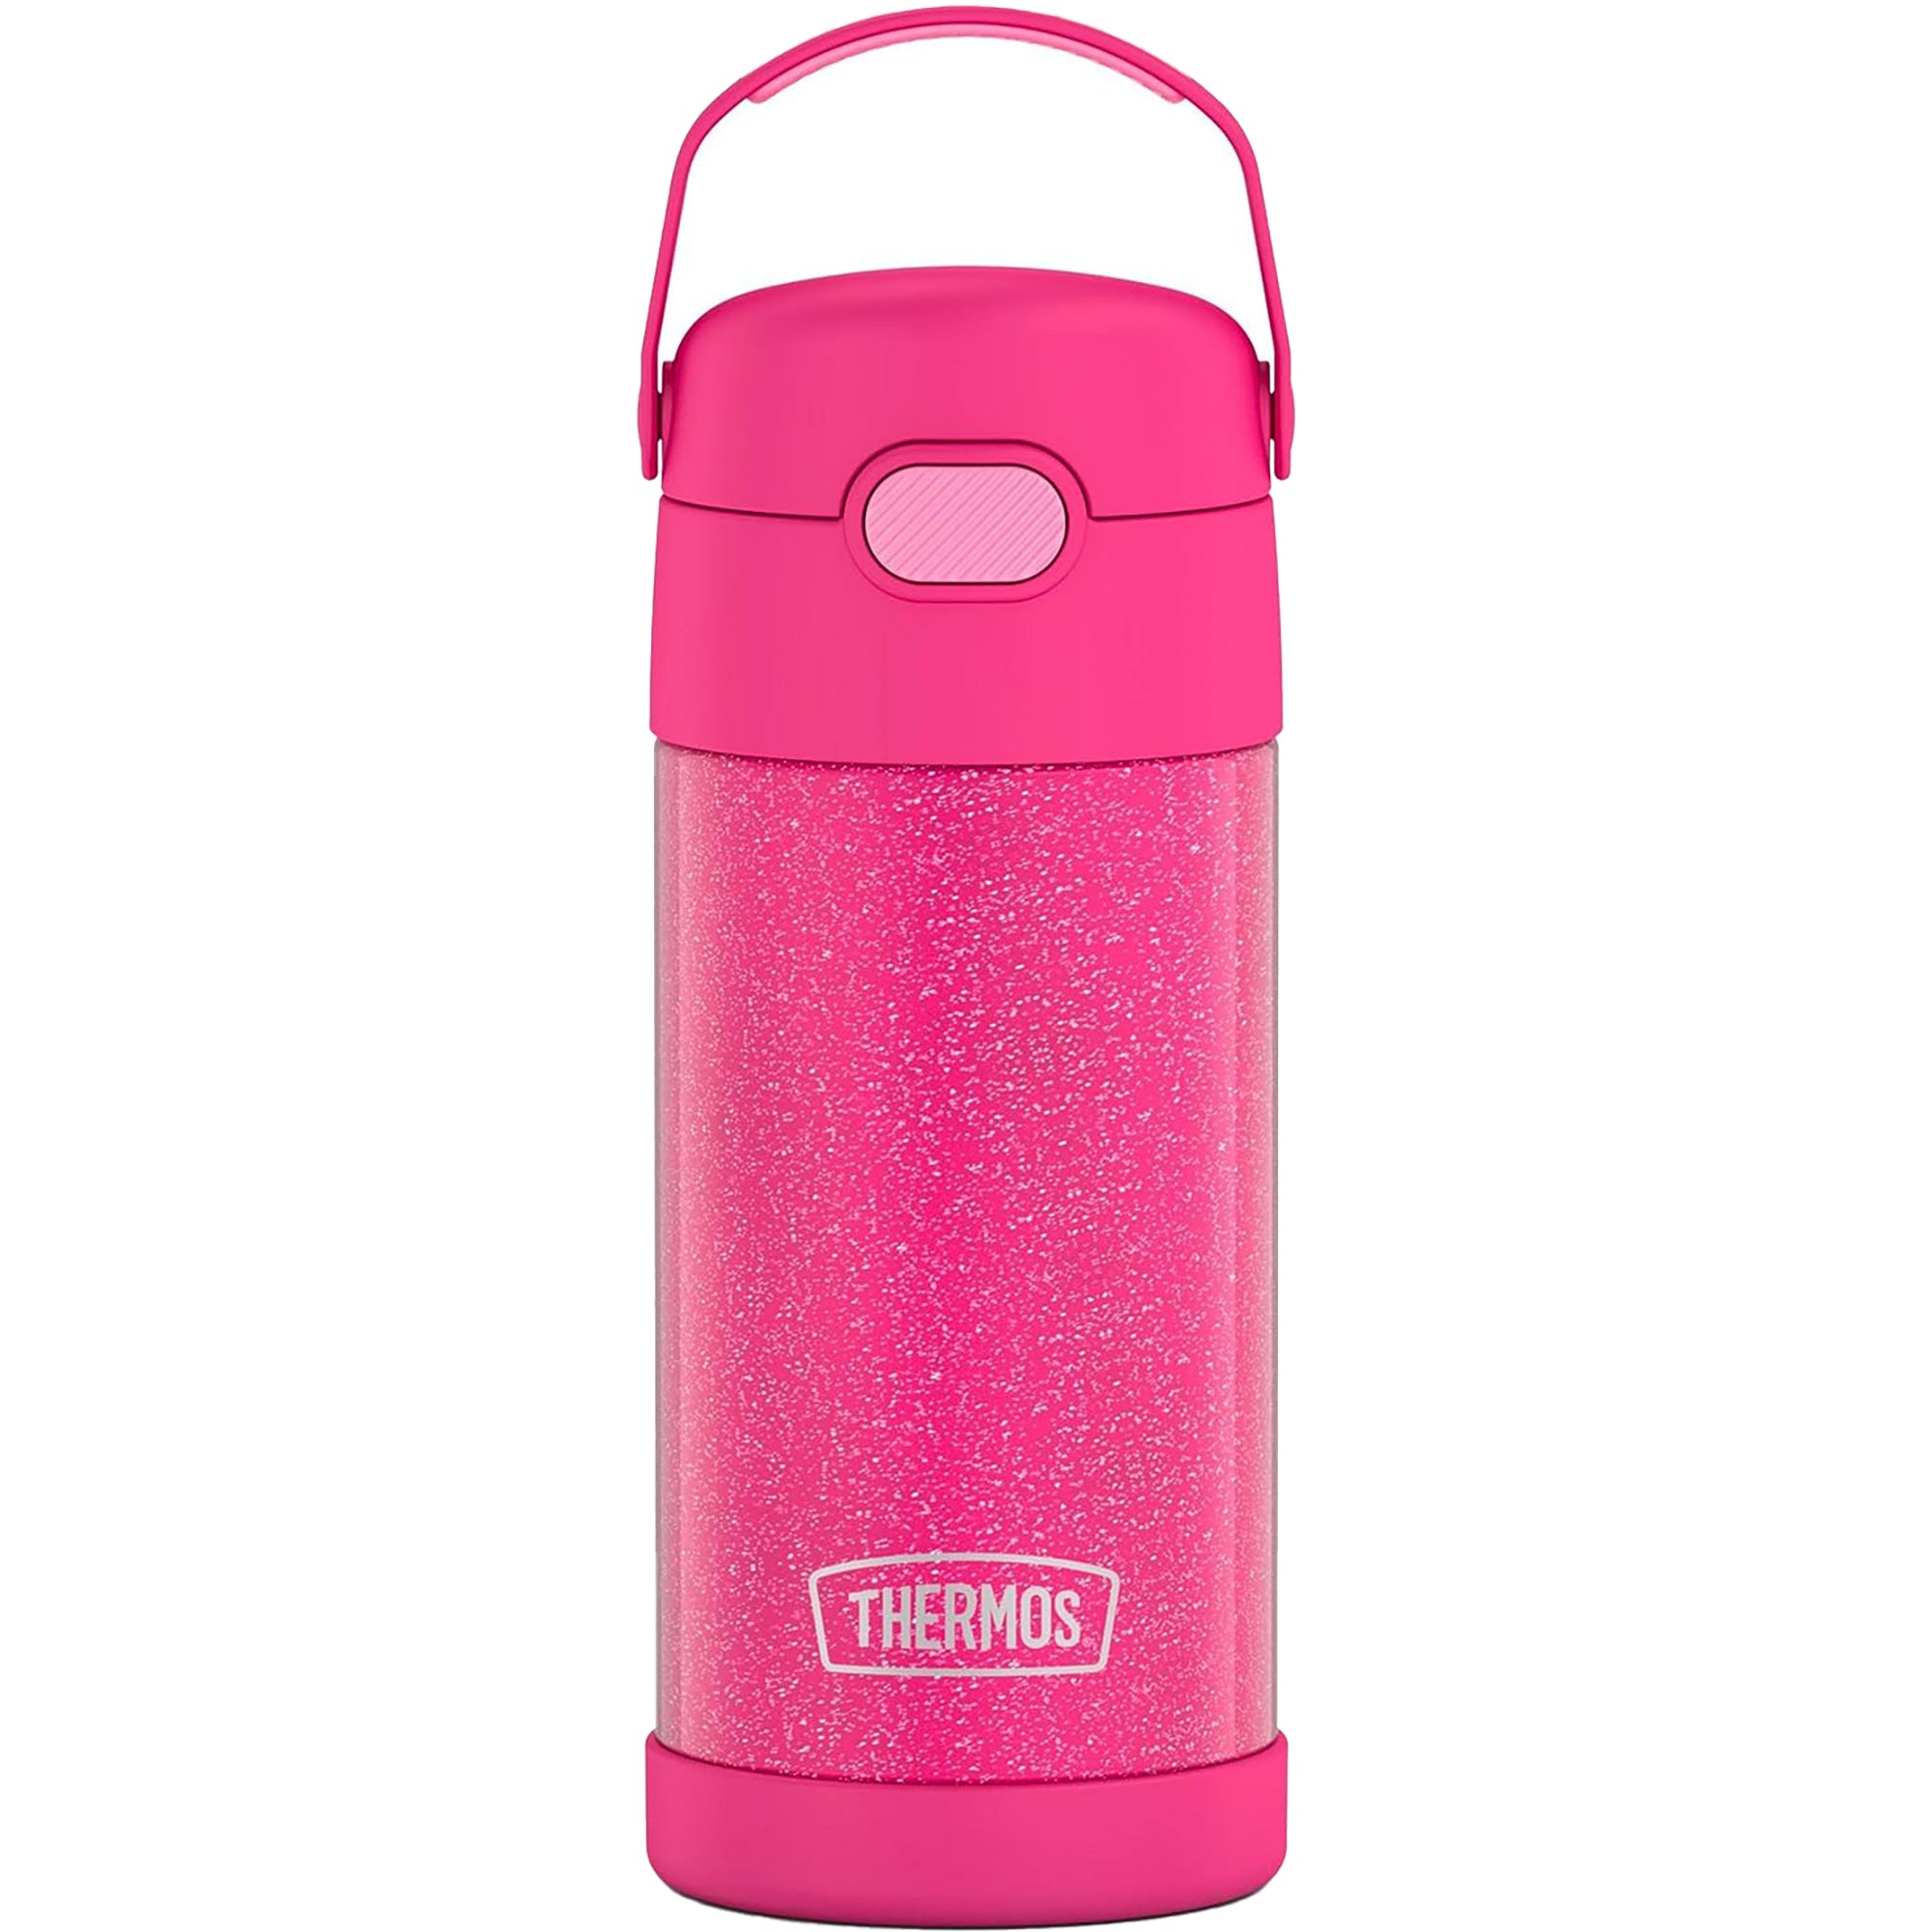 Thermos Kid's 12 oz. Funtainer Stainless Steel Water Bottle - Pink Glitter Thermos